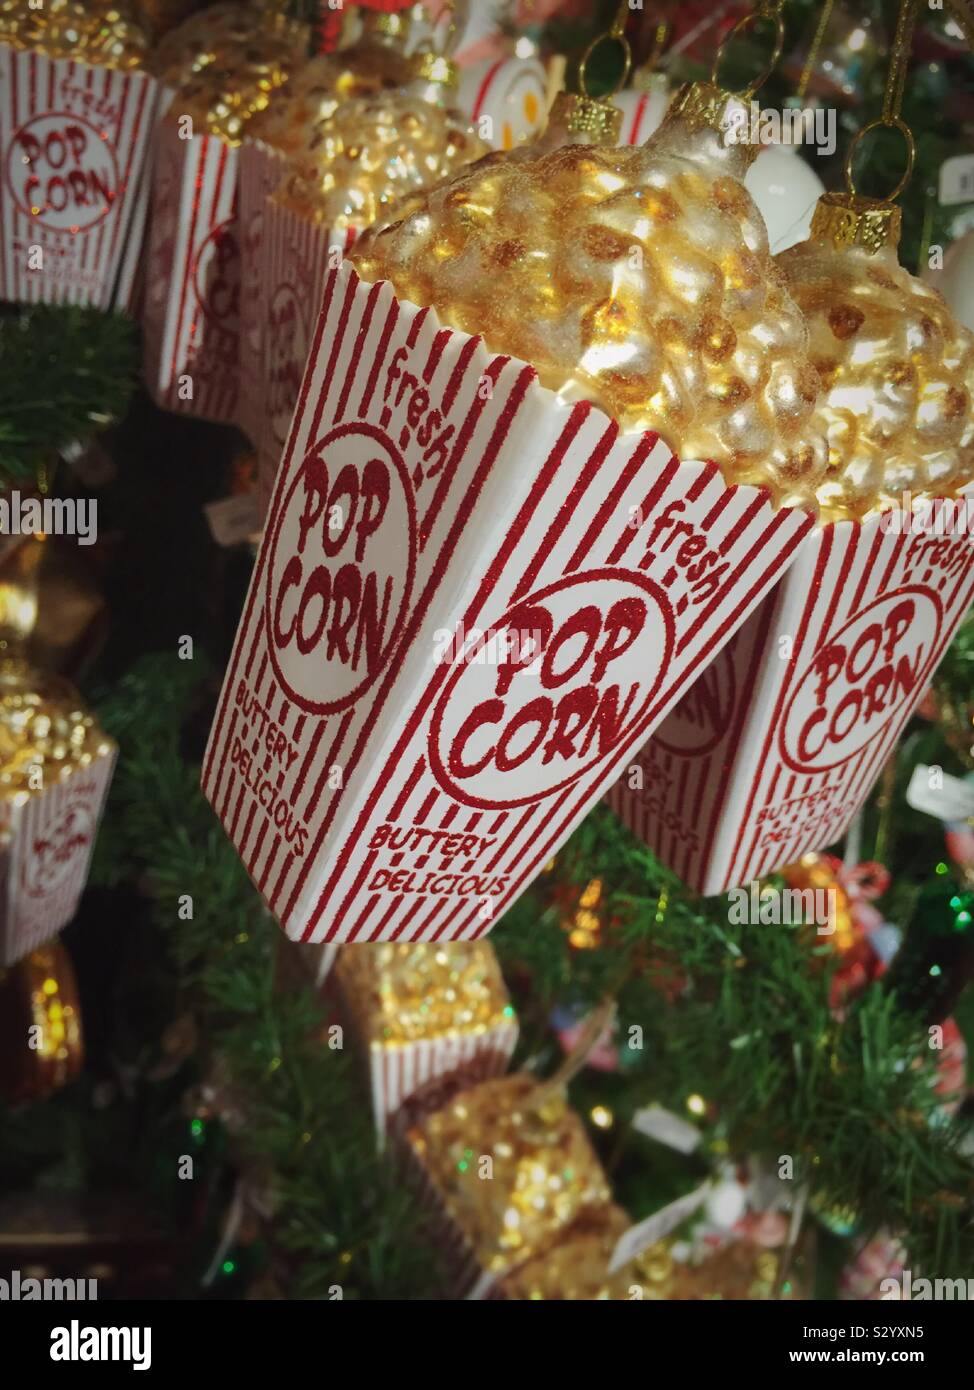 Close up of popcorn Christmas ornament hanging on a holiday tree, USA Stock Photo